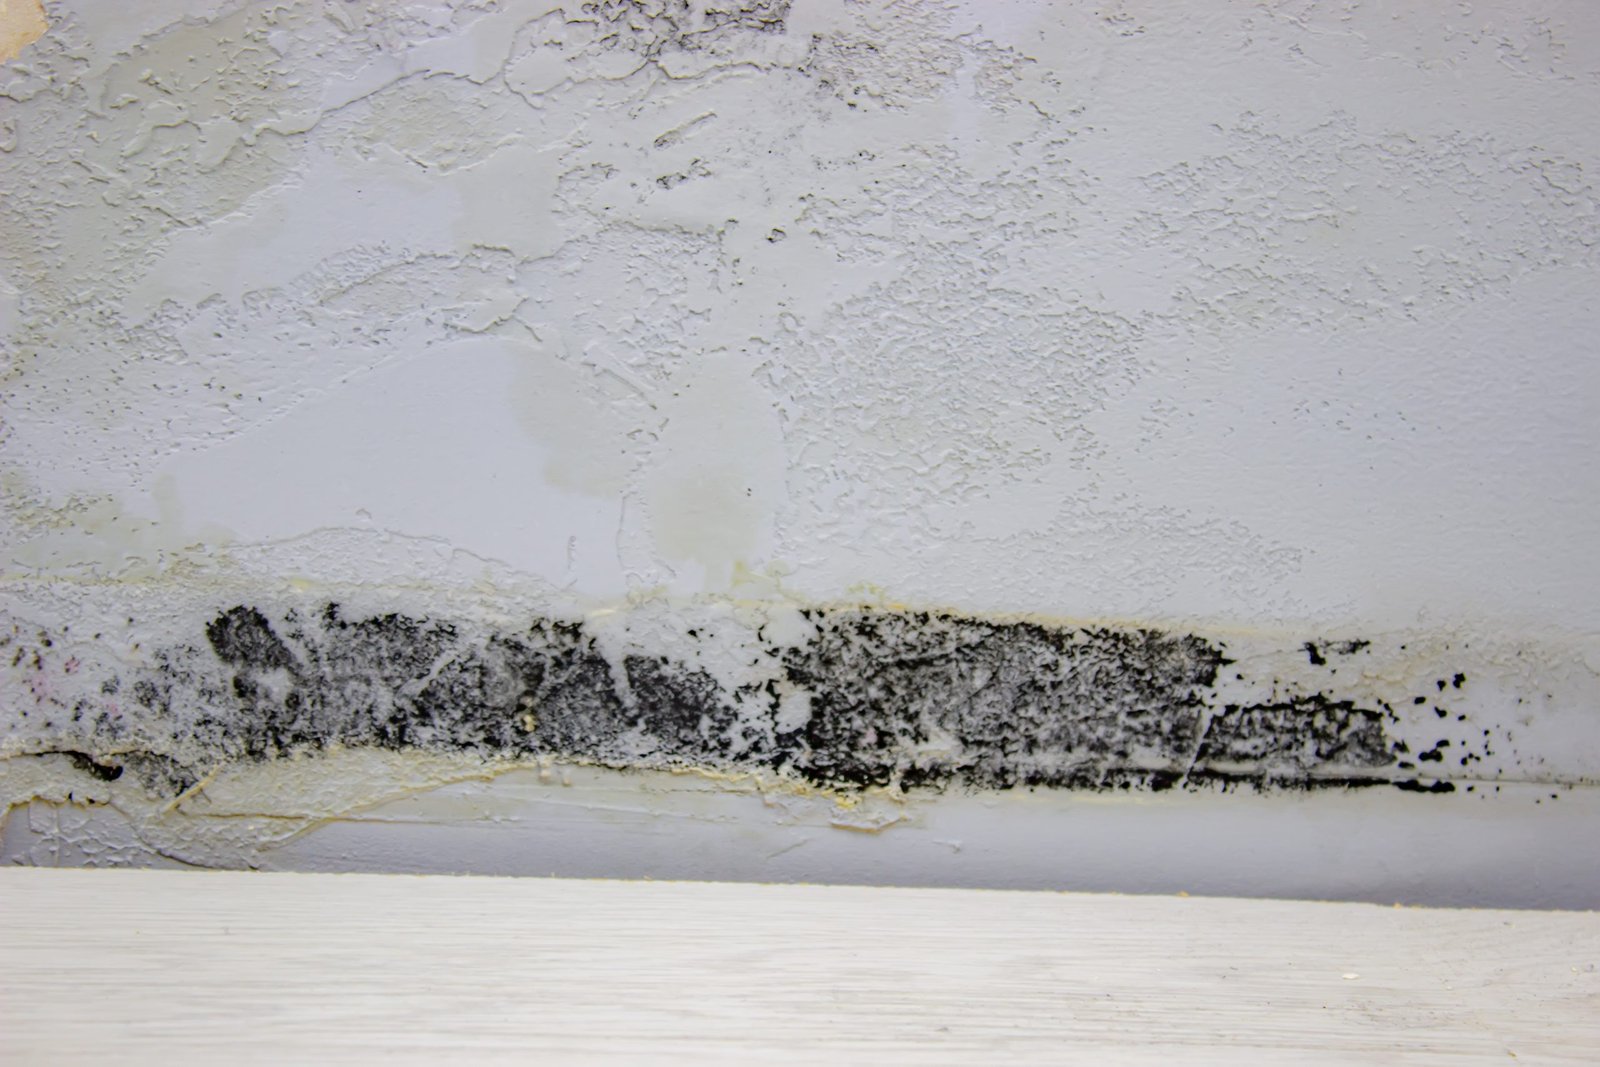 black-mold-on-the-wall-fungus-on-the-wall-Hurricane-Ian-How-to-Protect-Your-Home-from-Mold-After-the-Storm-scaled